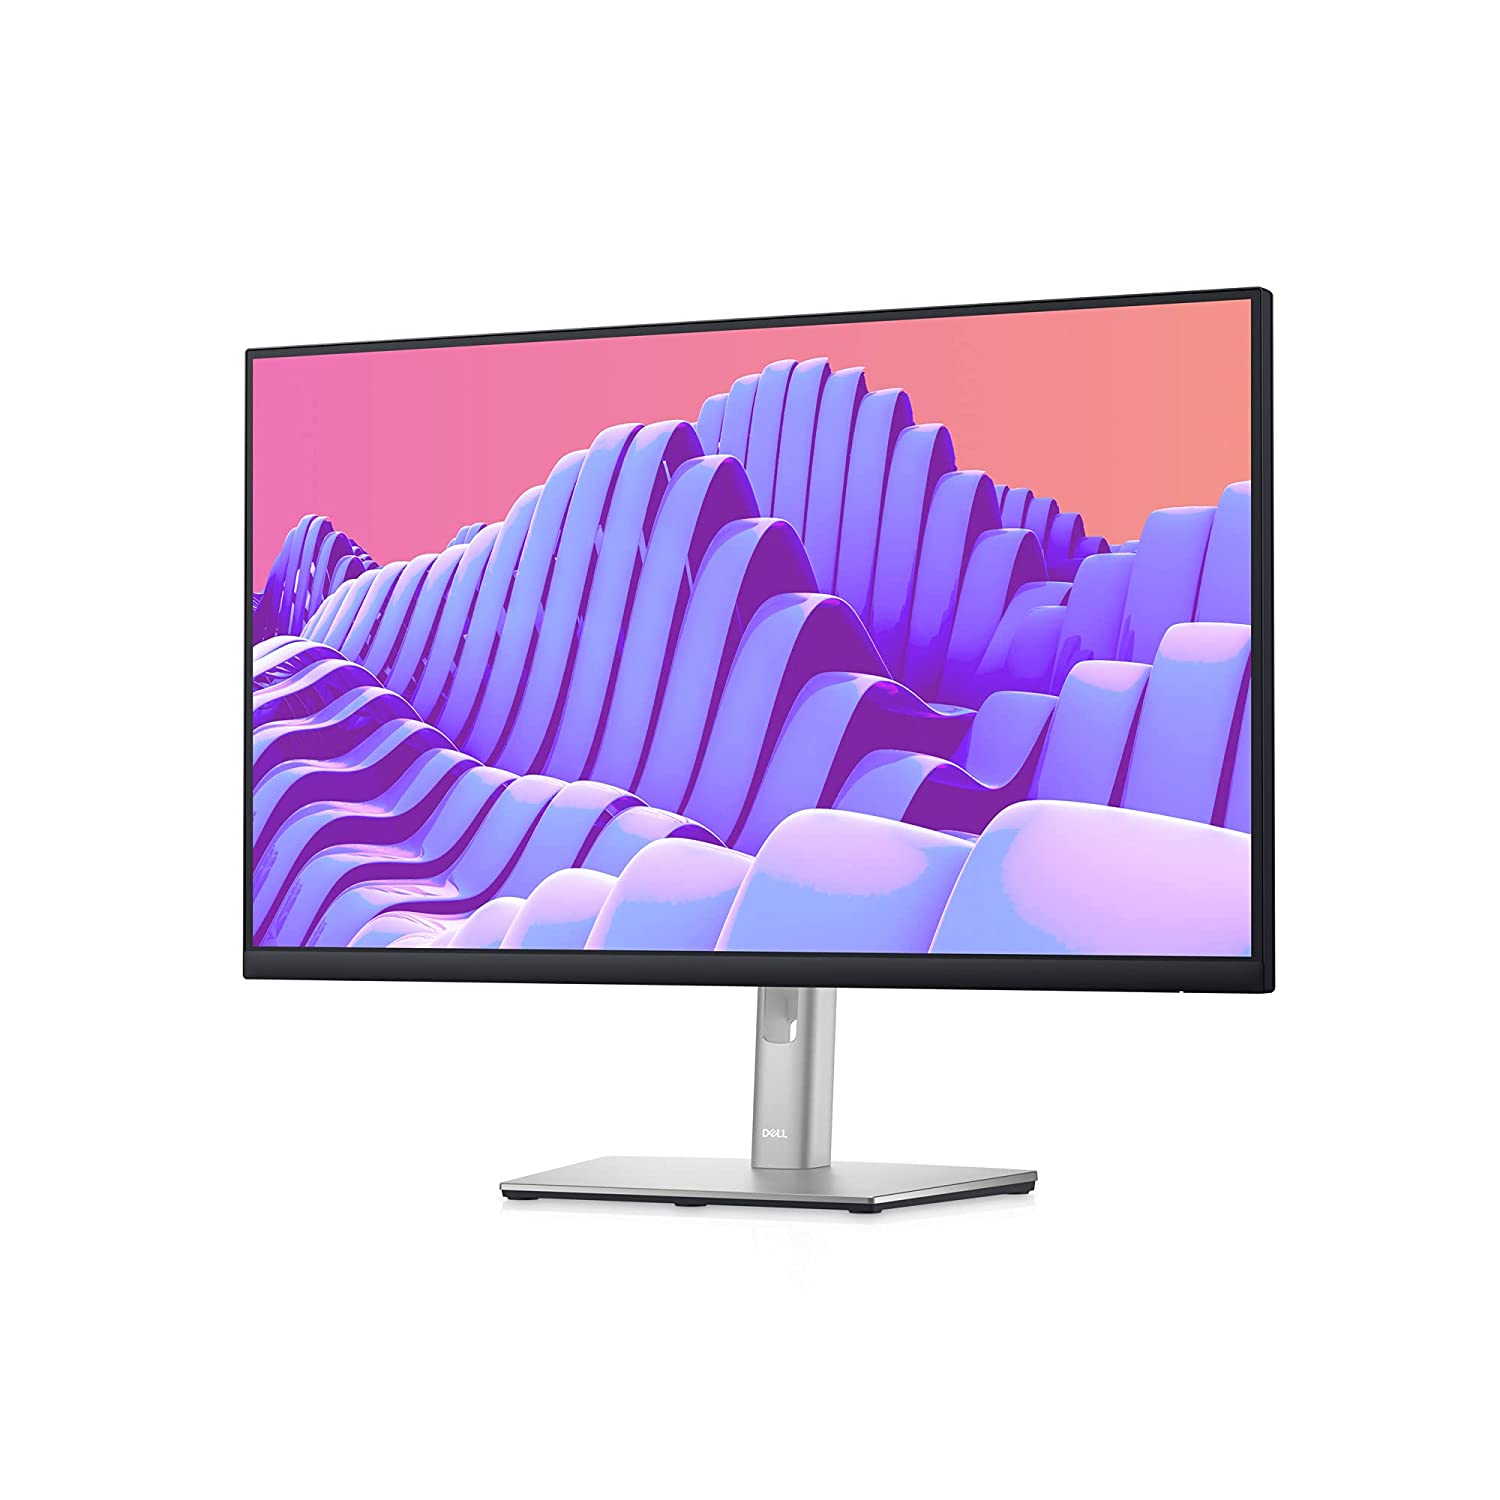 Dell 24 Monitor - P2722H, Full HD (1080p) 1920 x 1080 at 60 Hz, IPS Panel,  Anti-Glare, HDMI, VGA, DisplayPort with 3 Years Advanced Exchange Service  and Limited Hardware Warranty, Black